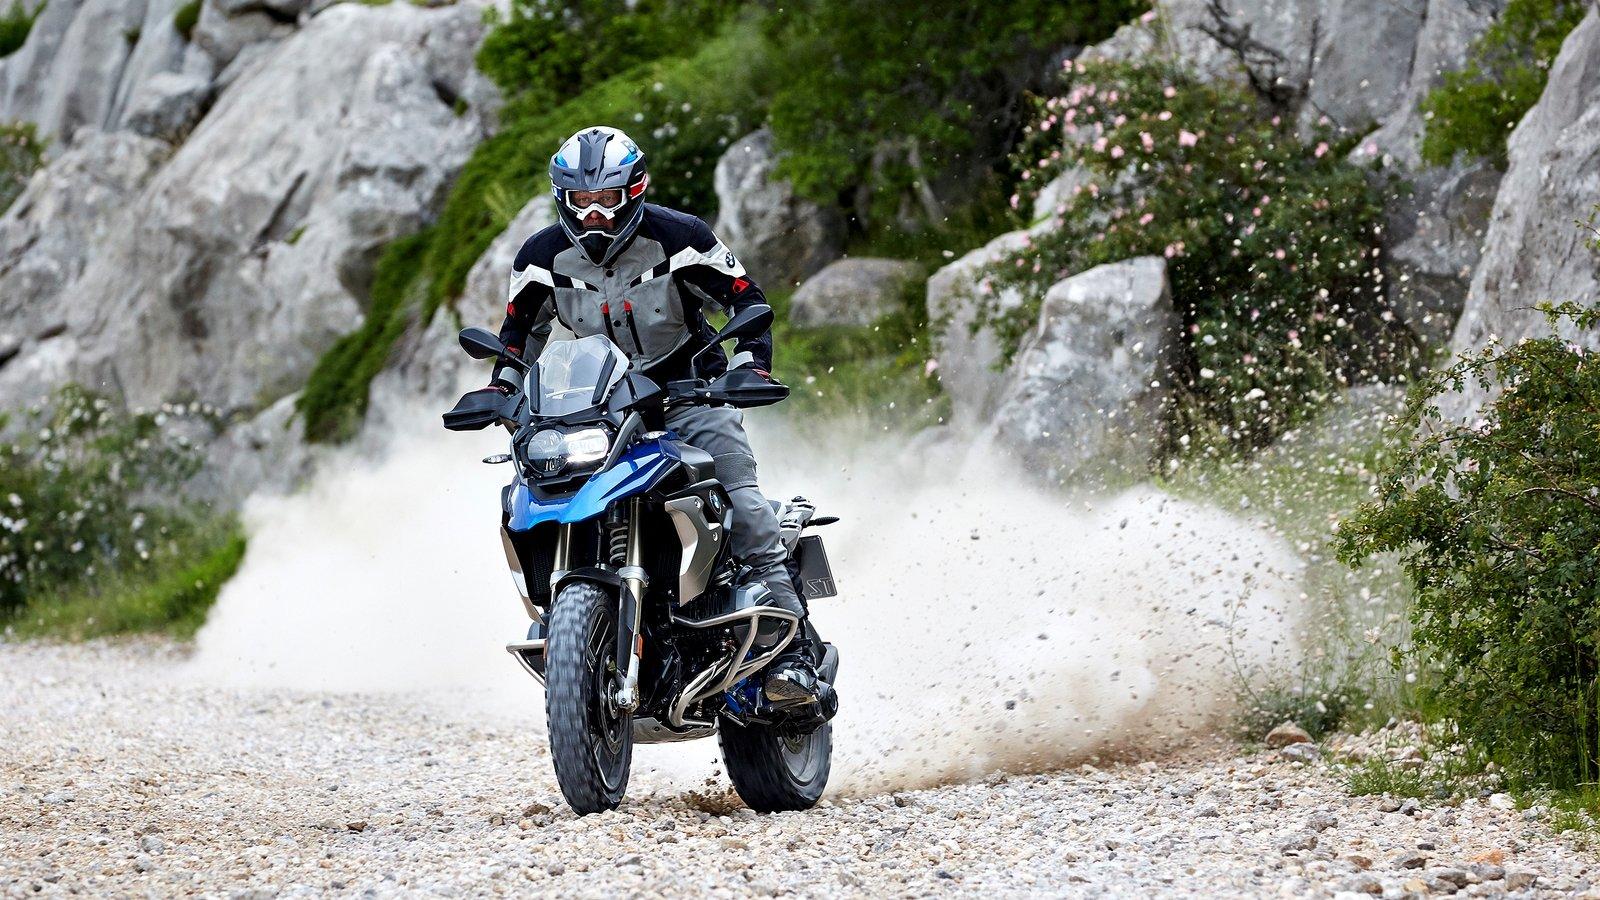 2018 BMW R 1200 GS Picture, Photo, Wallpaper And Video